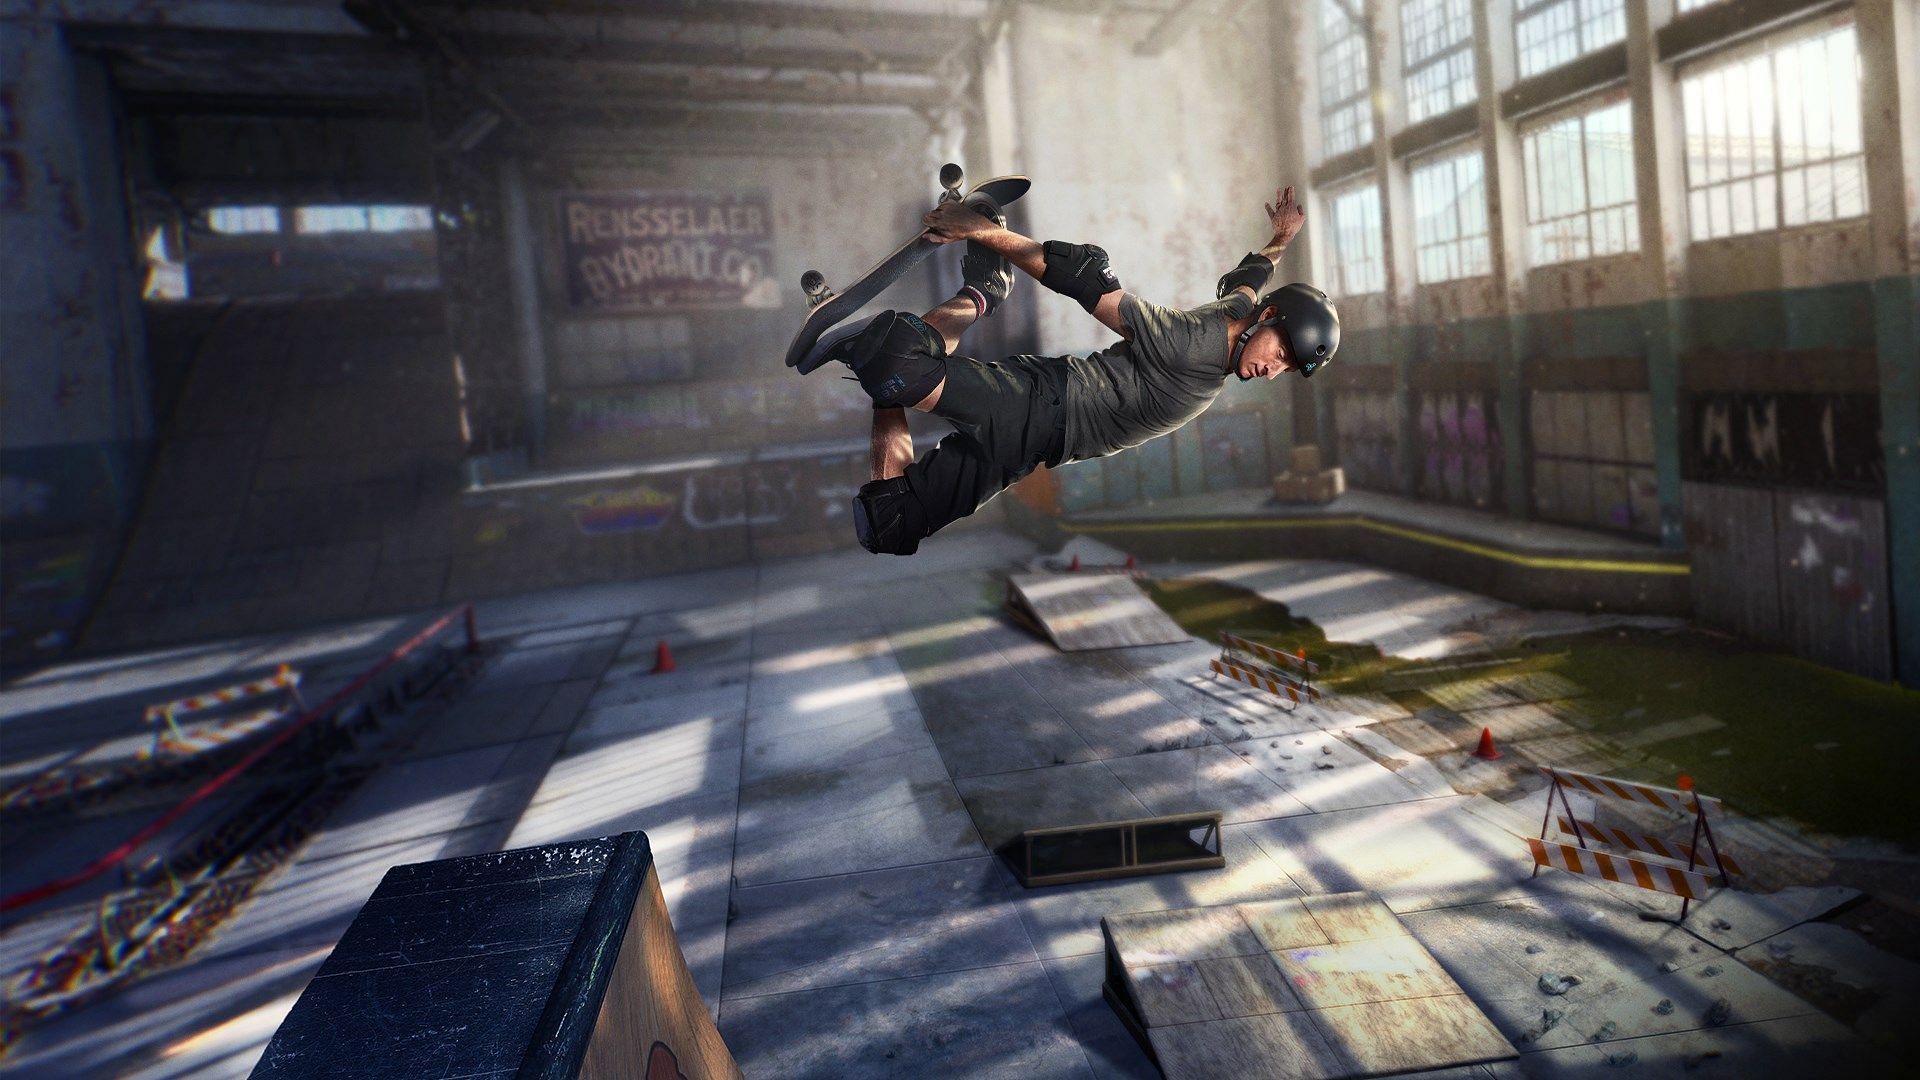 Slide into Skating Rinks and bust out awesome moves for your viewers to see in order to flex them. (Image via Vicarous Vision)